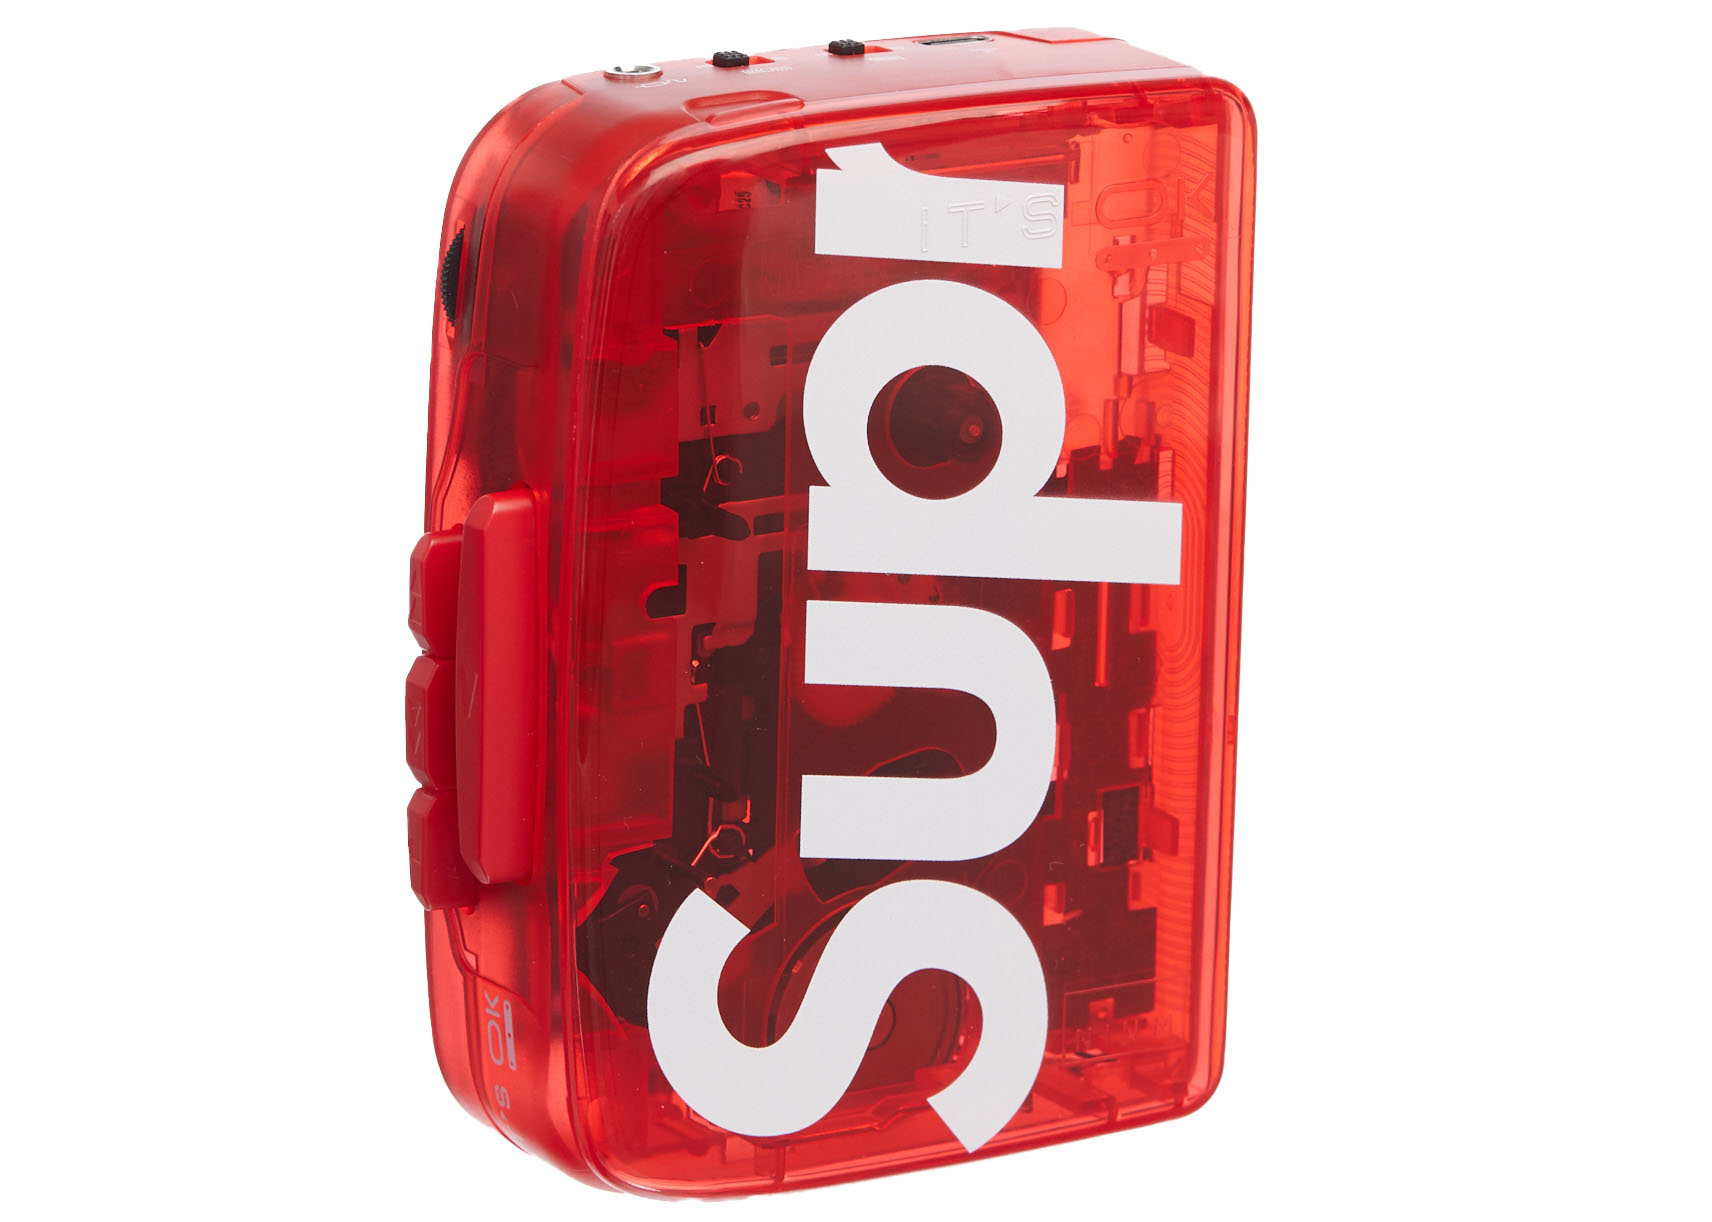 Supreme IT'S OK TOO Cassette Player Red - SS22 - US